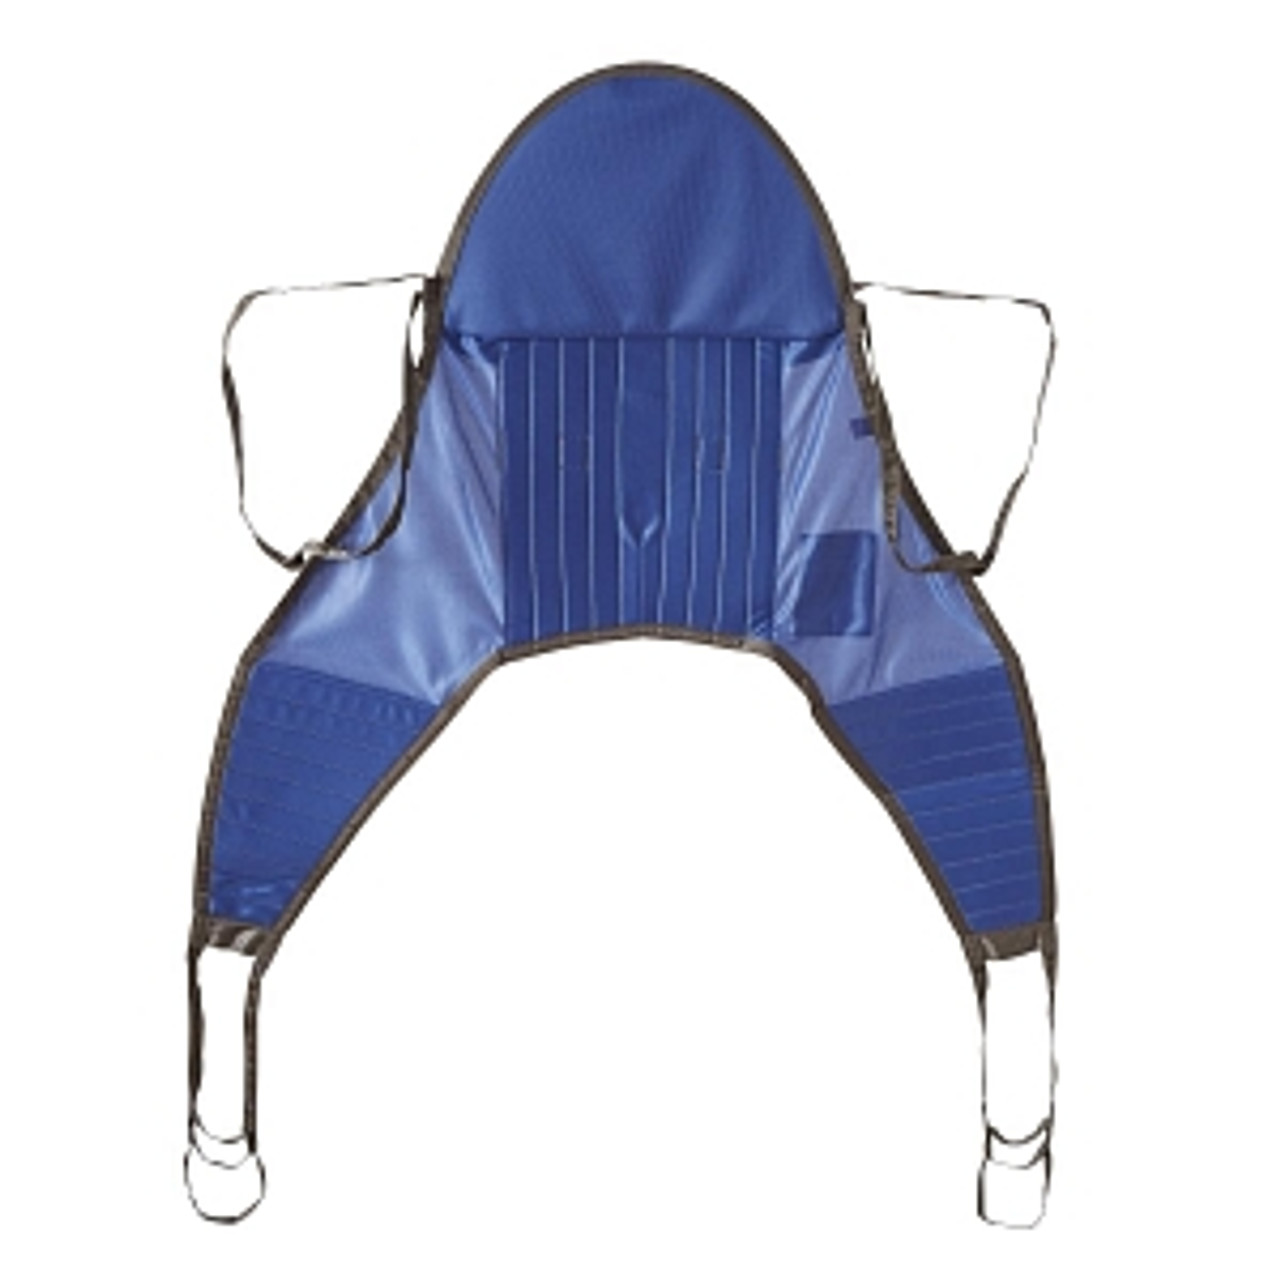 Slings designed for comfort and created to be easy-to-use
Secure, easy-to-fit general purpose sling
U-shaped slings have the advantage of being easy to put under and remove from patients